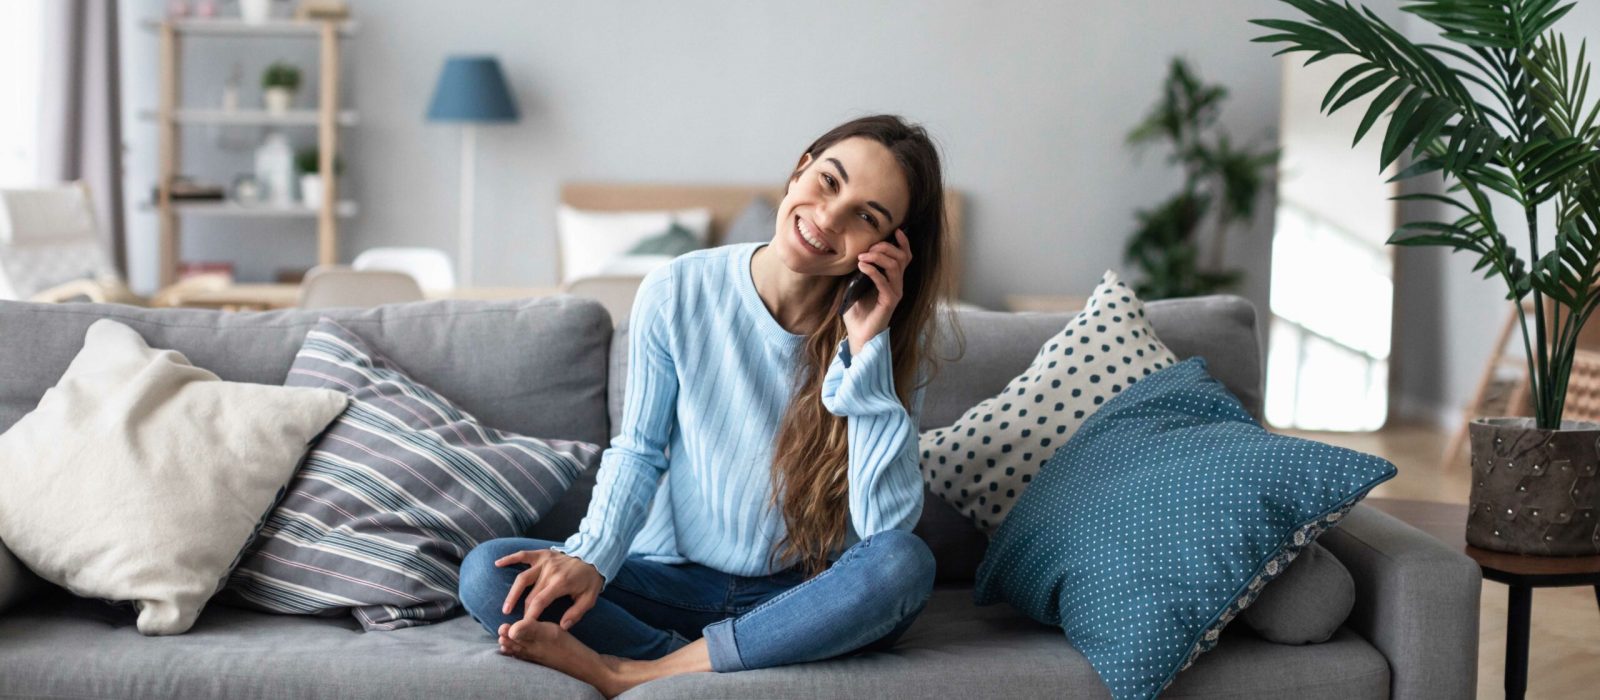 Attractive smiling woman talking on the phone at home. Technology, communication and coziness concept.